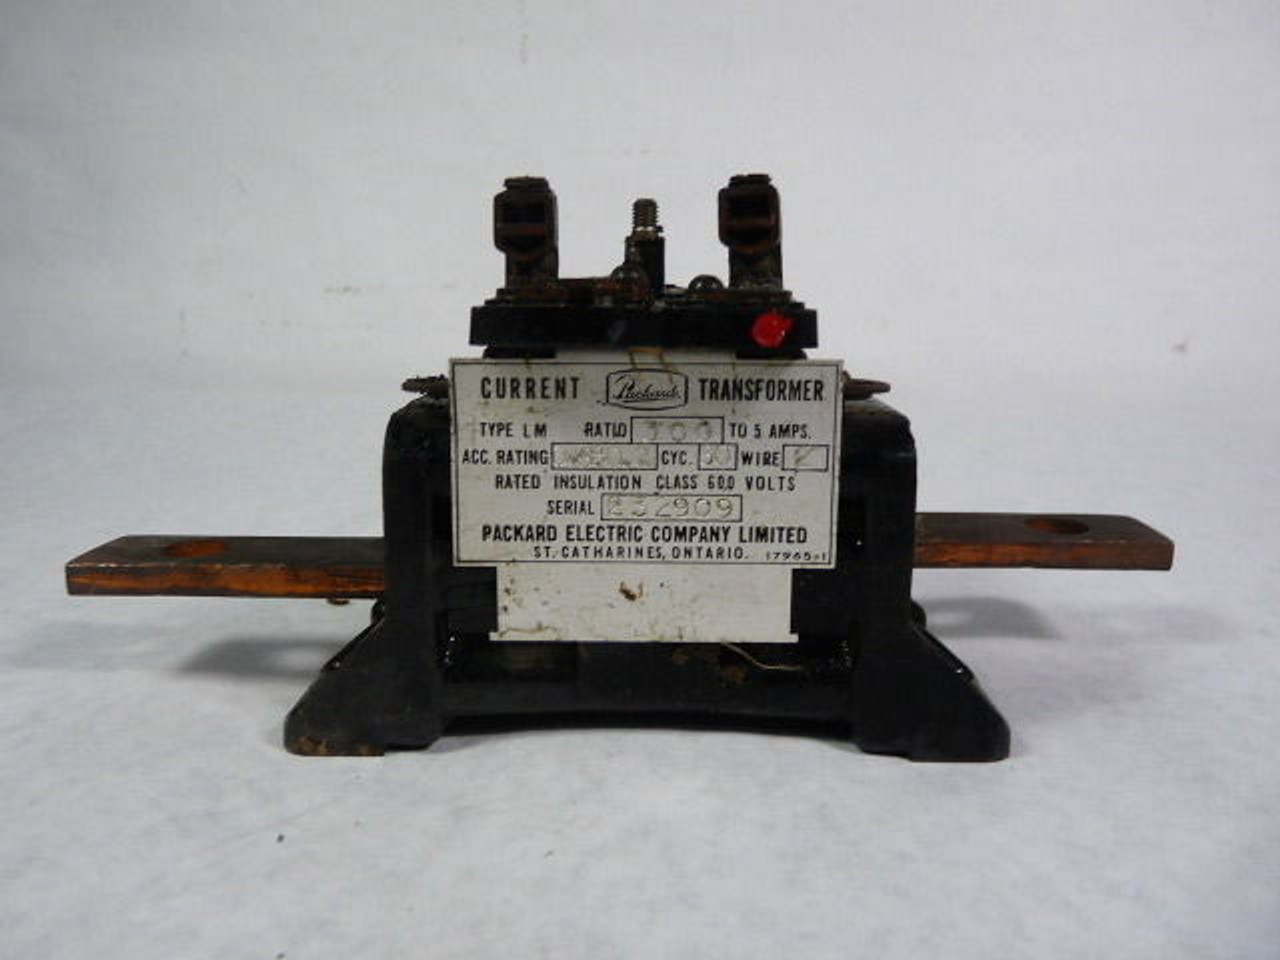 Packard 17965-1 Type LM Current Transformer 300:5A 60Hz 600V USED